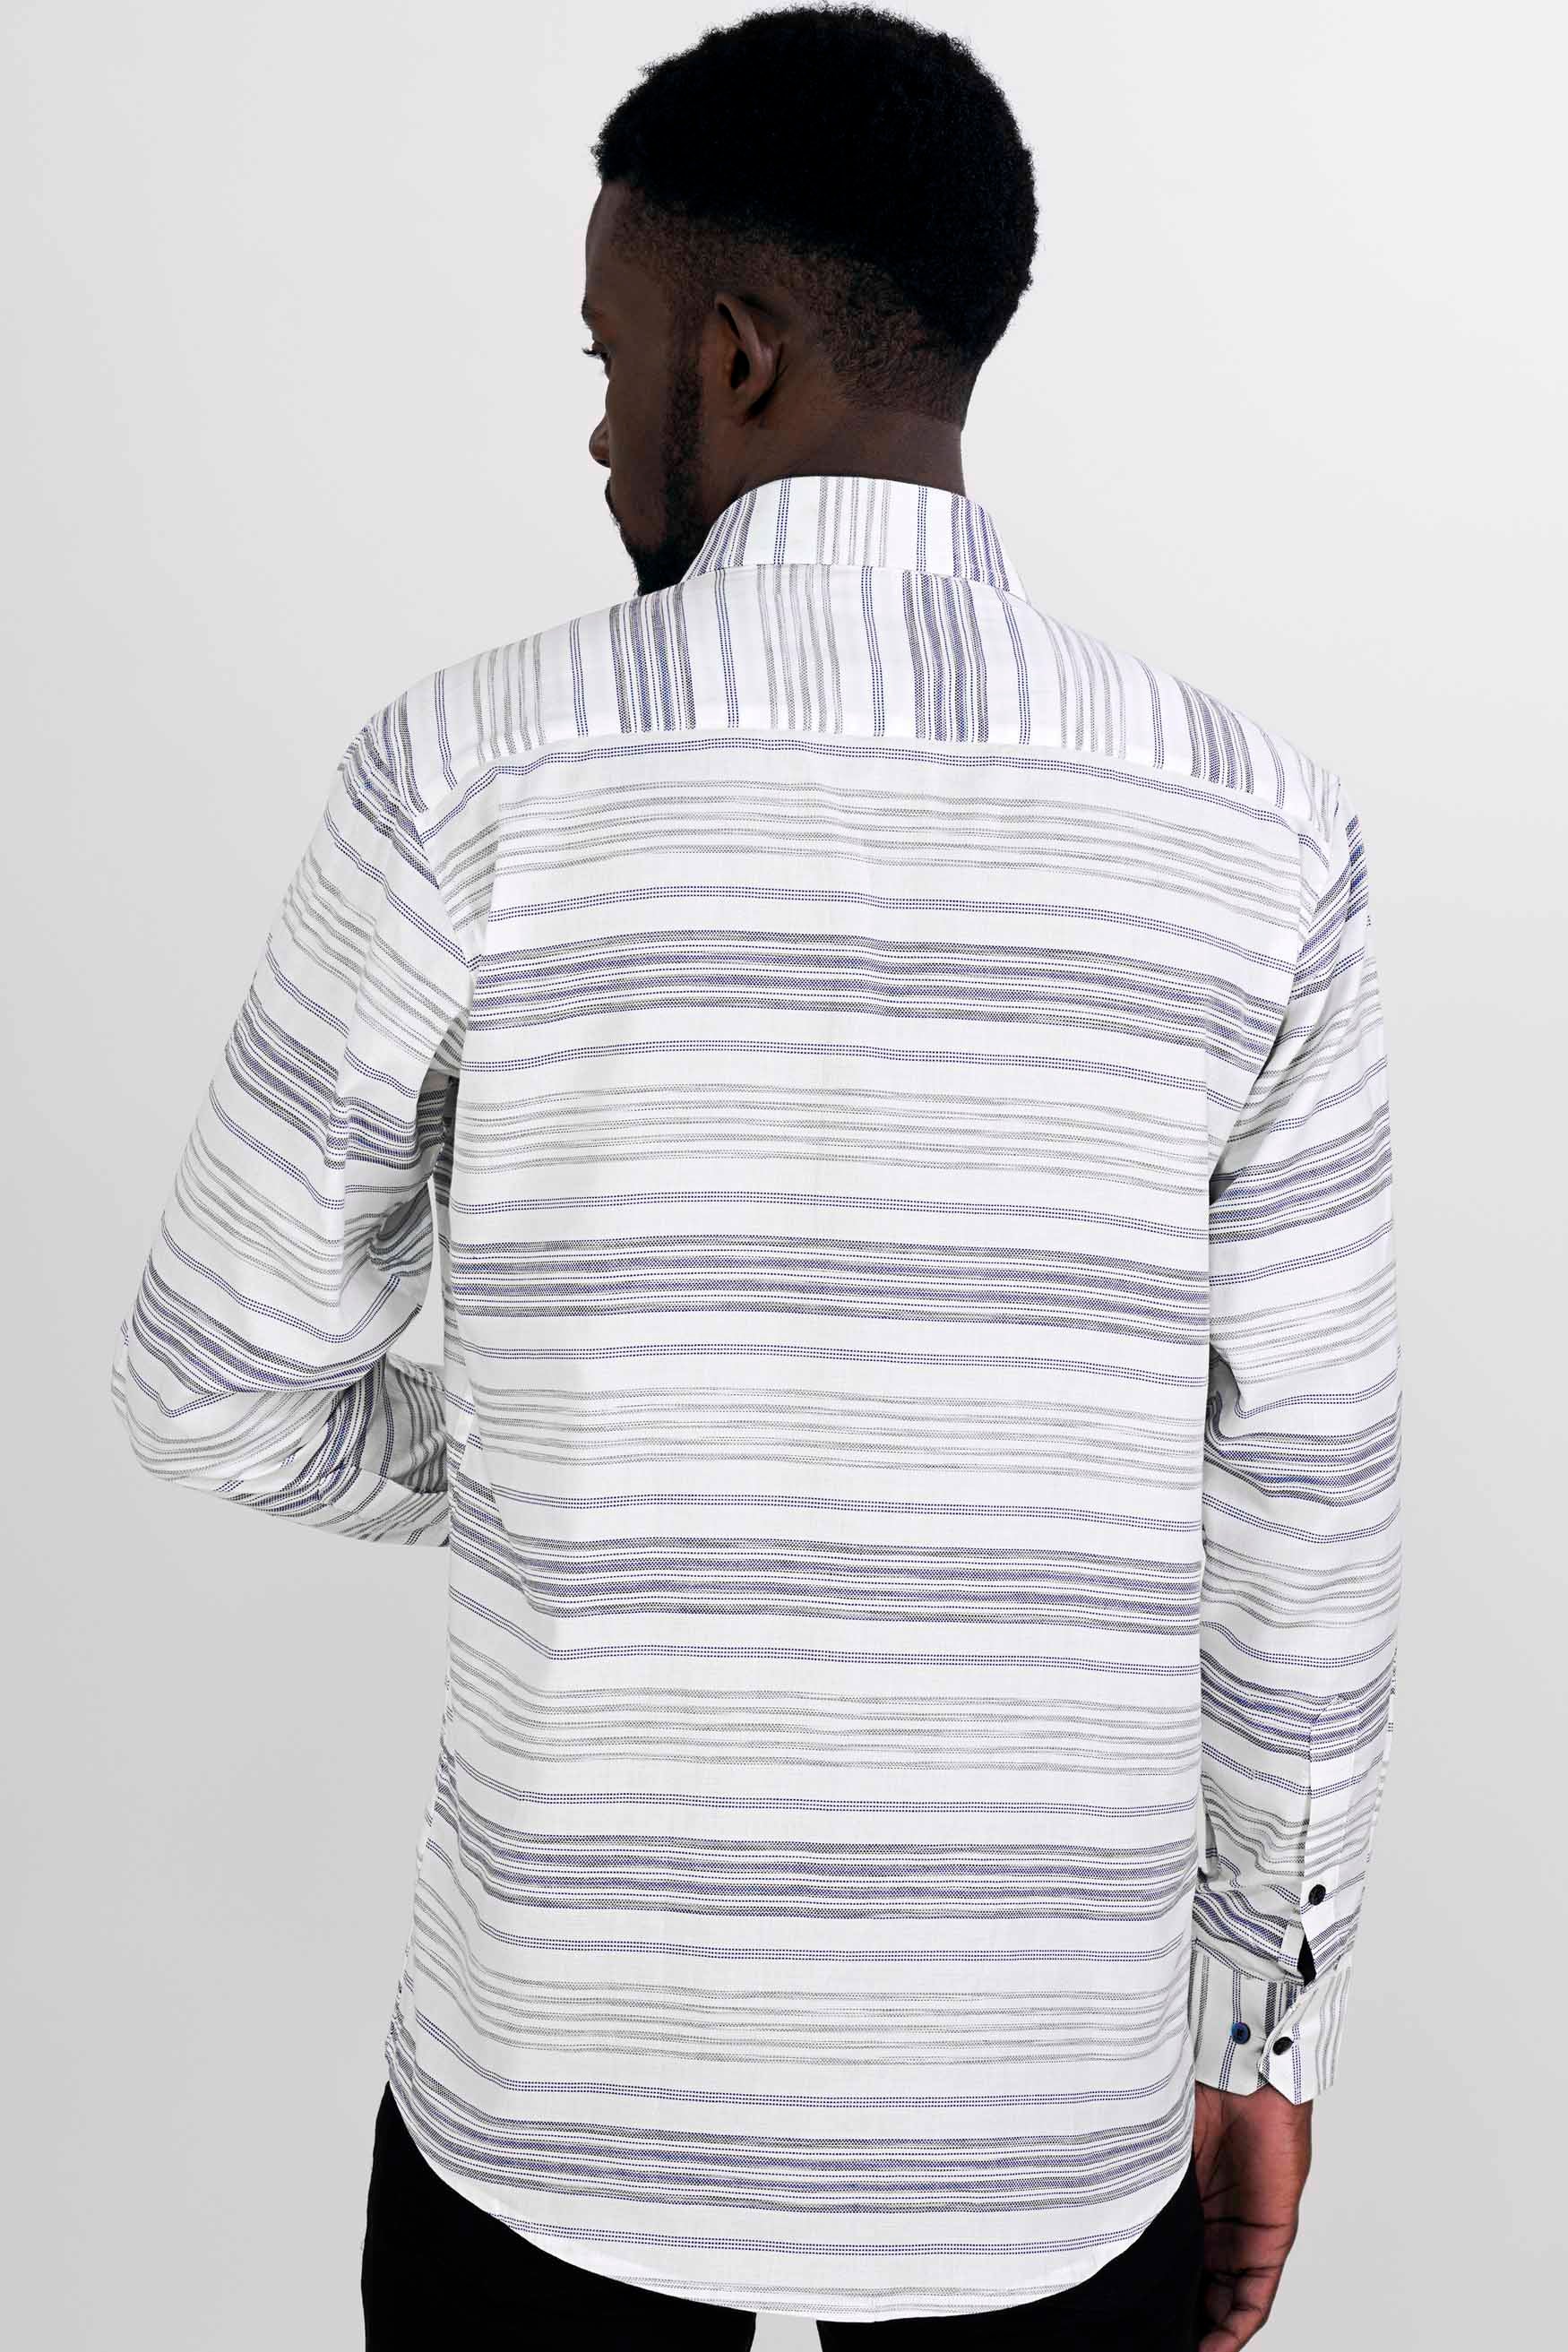 Bright White and Minsk Blue Striped with Horse Embroidered Dobby Premium Giza Cotton Designer Shirt 6198-CA-BLE-E192-38, 6198-CA-BLE-E192-H-38, 6198-CA-BLE-E192-39, 6198-CA-BLE-E192-H-39, 6198-CA-BLE-E192-40, 6198-CA-BLE-E192-H-40, 6198-CA-BLE-E192-42, 6198-CA-BLE-E192-H-42, 6198-CA-BLE-E192-44, 6198-CA-BLE-E192-H-44, 6198-CA-BLE-E192-46, 6198-CA-BLE-E192-H-46, 6198-CA-BLE-E192-48, 6198-CA-BLE-E192-H-48, 6198-CA-BLE-E192-50, 6198-CA-BLE-E192-H-50, 6198-CA-BLE-E192-52, 6198-CA-BLE-E192-H-52